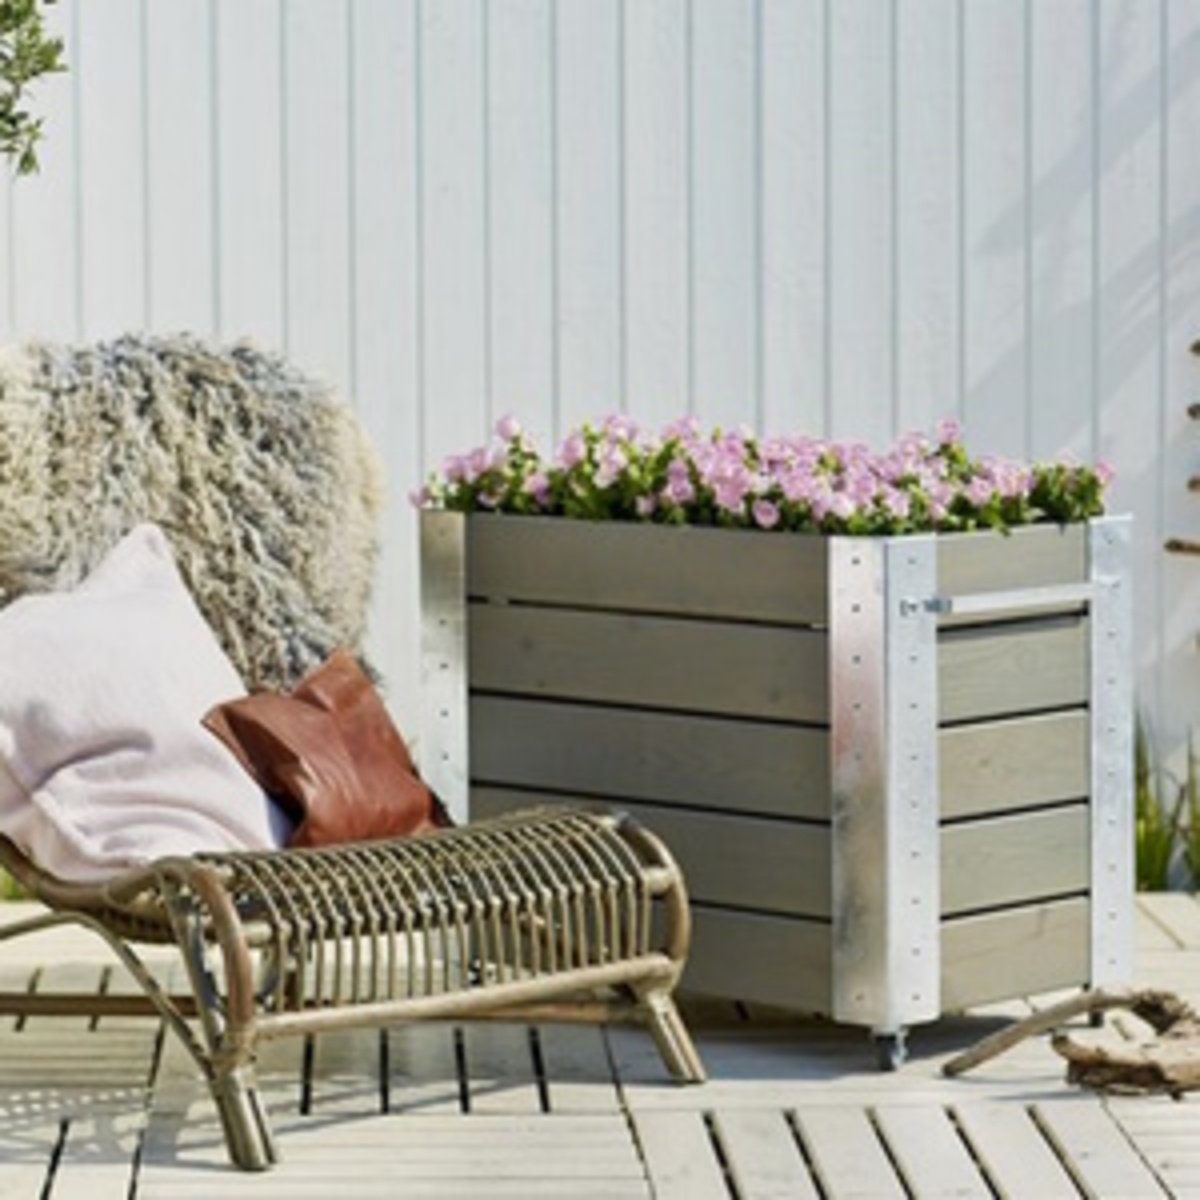 Planter on wheels for outdoor use - CUBIC